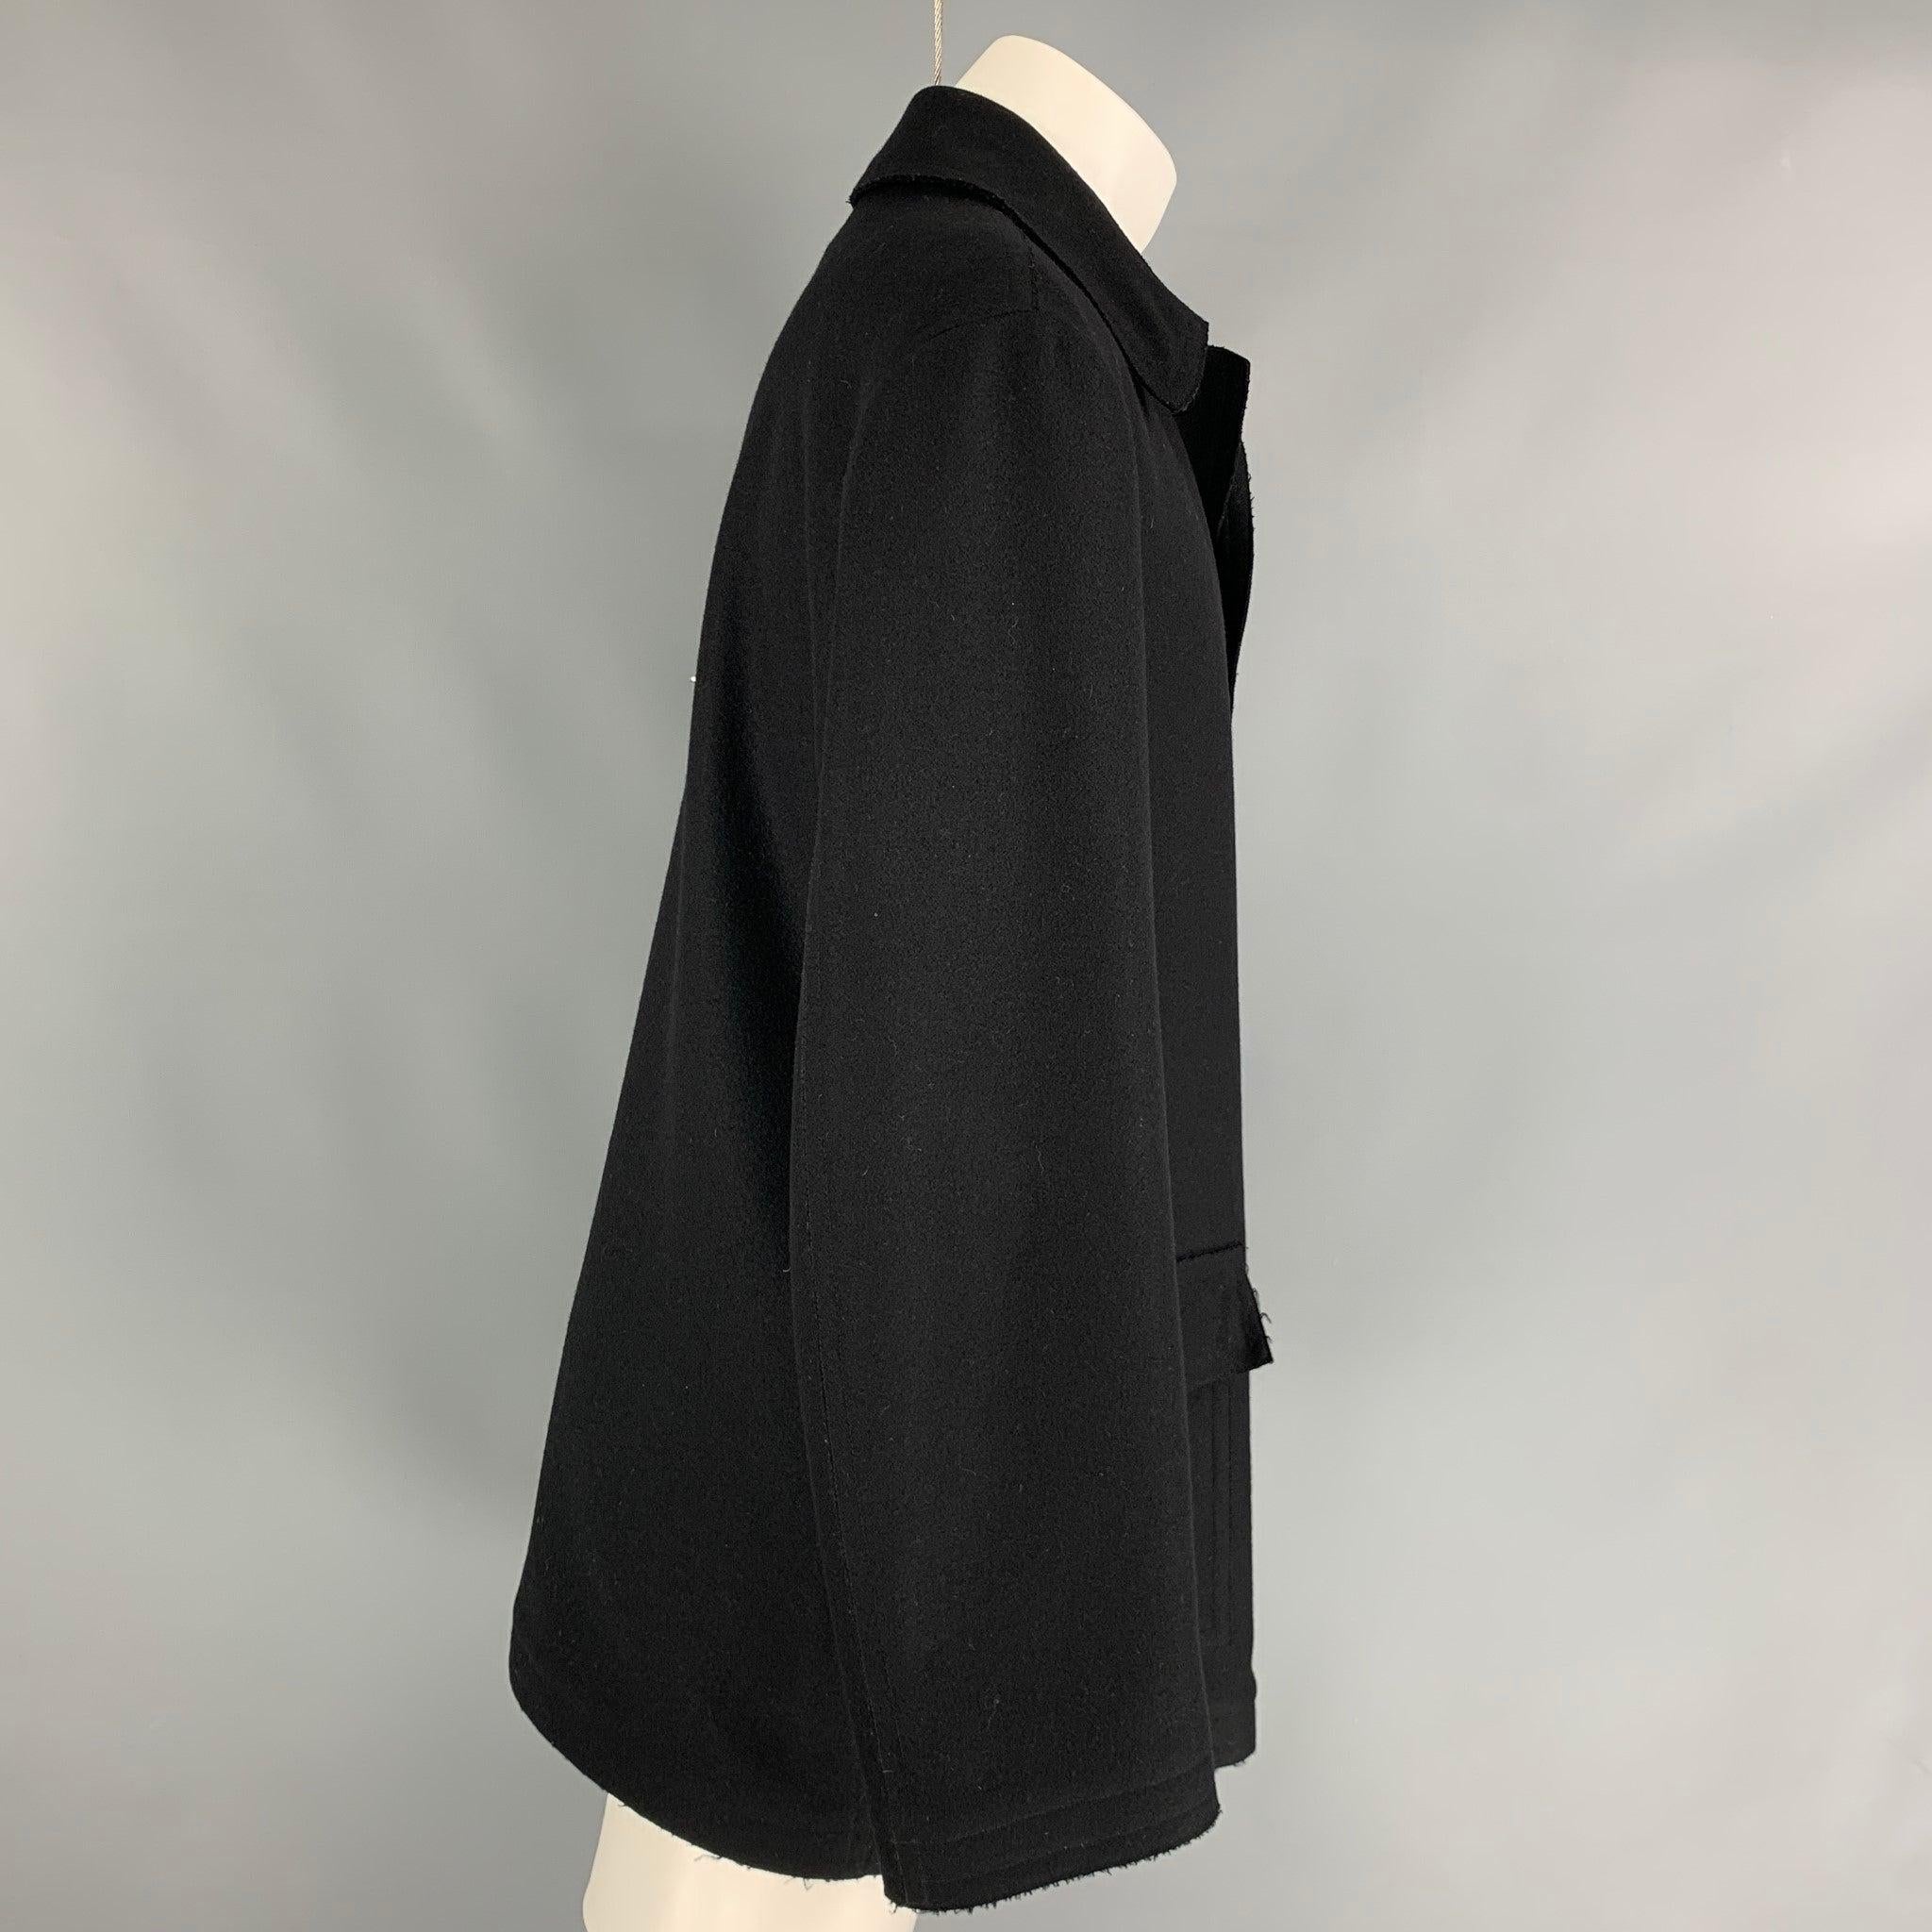 GIORGIO ARMANI Size 38 black Wool Single breasted Peacoat In Good Condition For Sale In San Francisco, CA